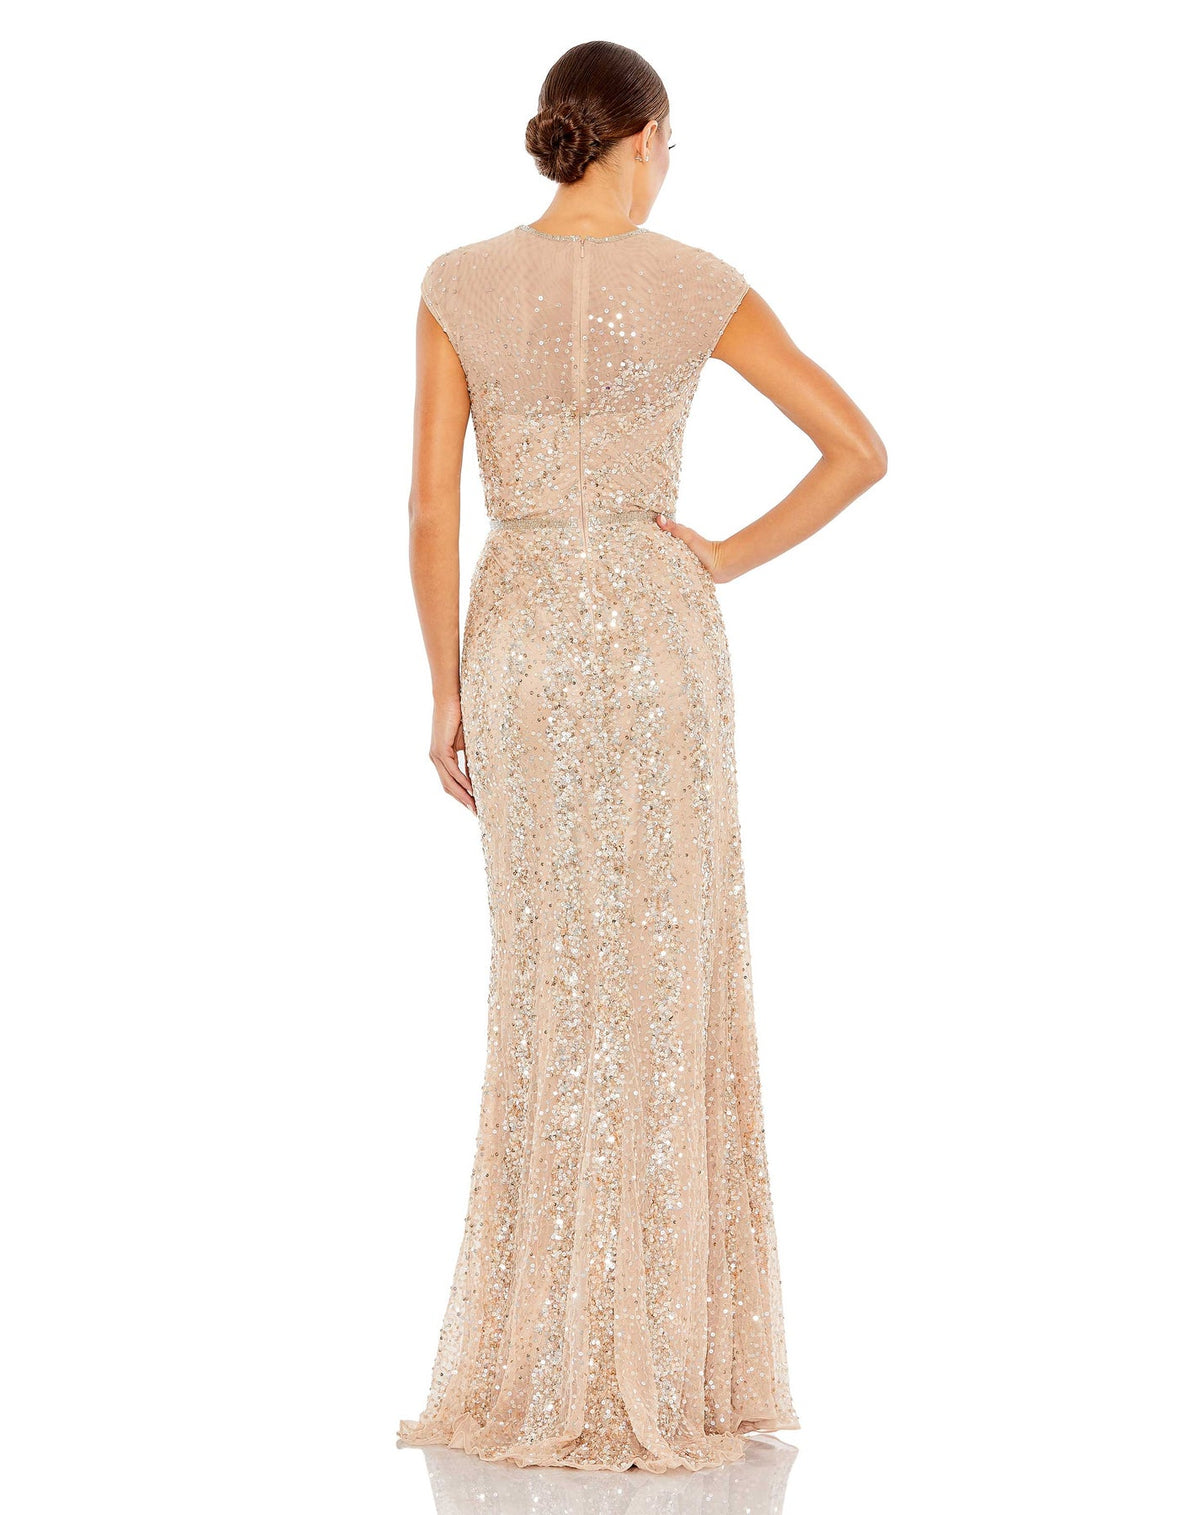 Mac Duggal Style #5619 Embellished illusion high neck cap sleeve gown - Nude back view